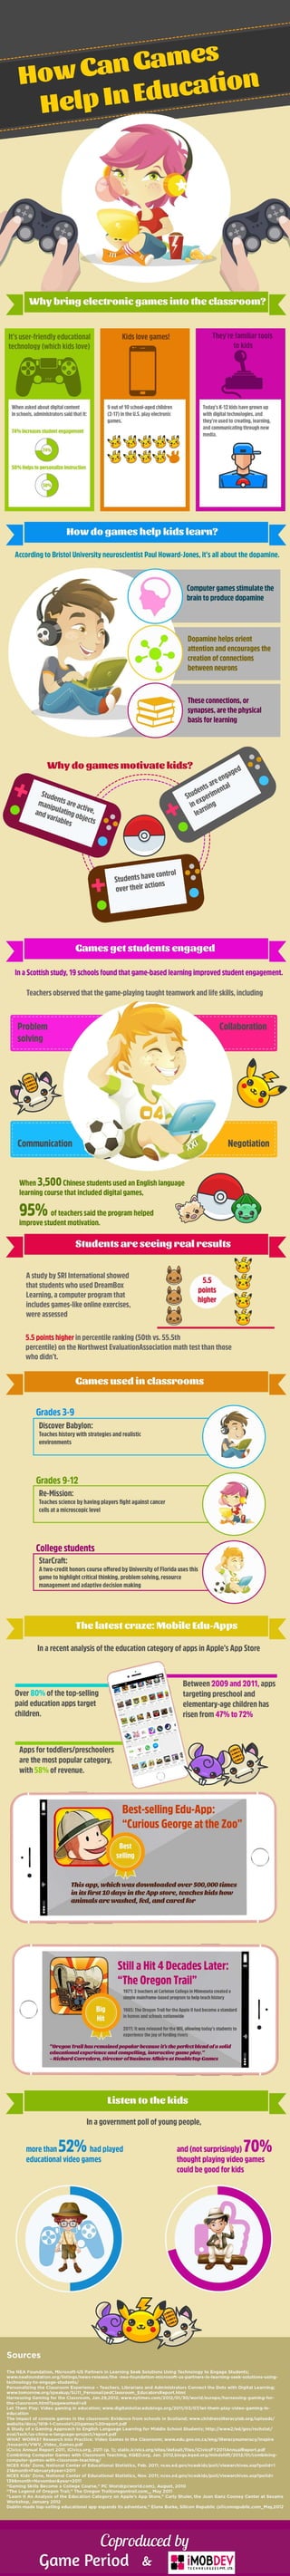 How do games help students learn